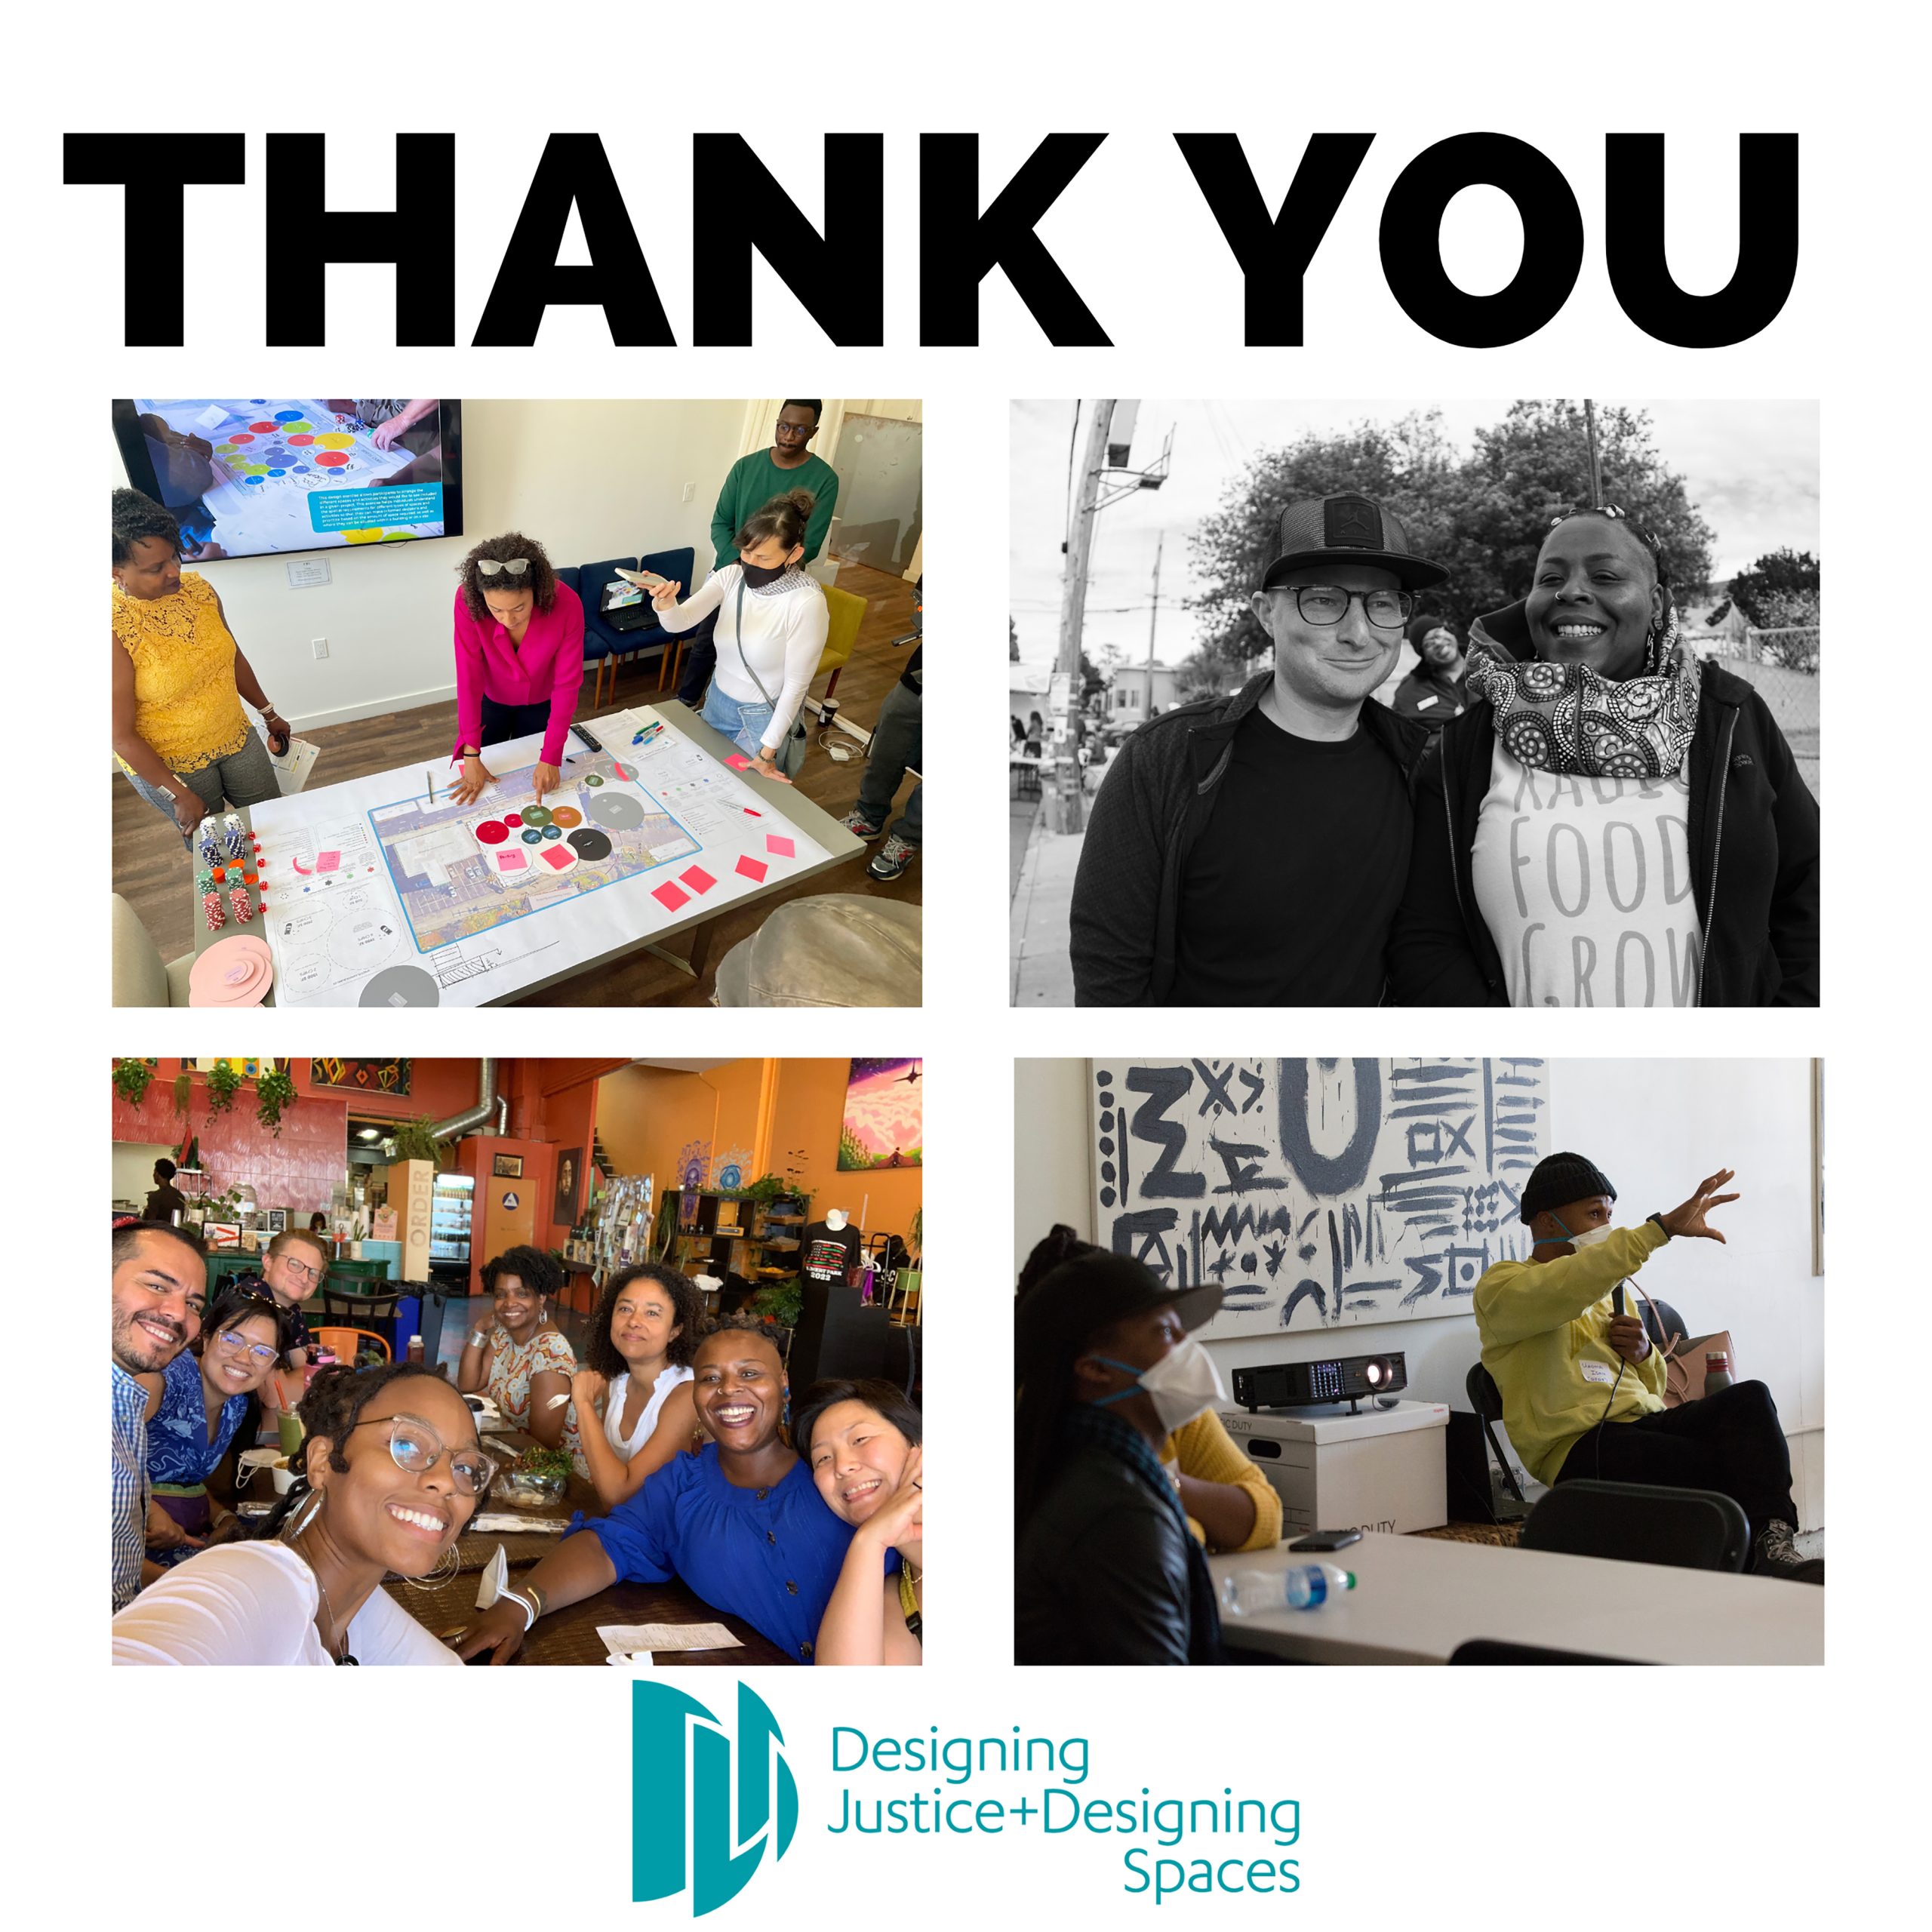 A graphic with four thumbnail photographs showing the Designing Justice team at work with the words THANK YOU and the Designing Justice + Designing Spaces logo in the corner.